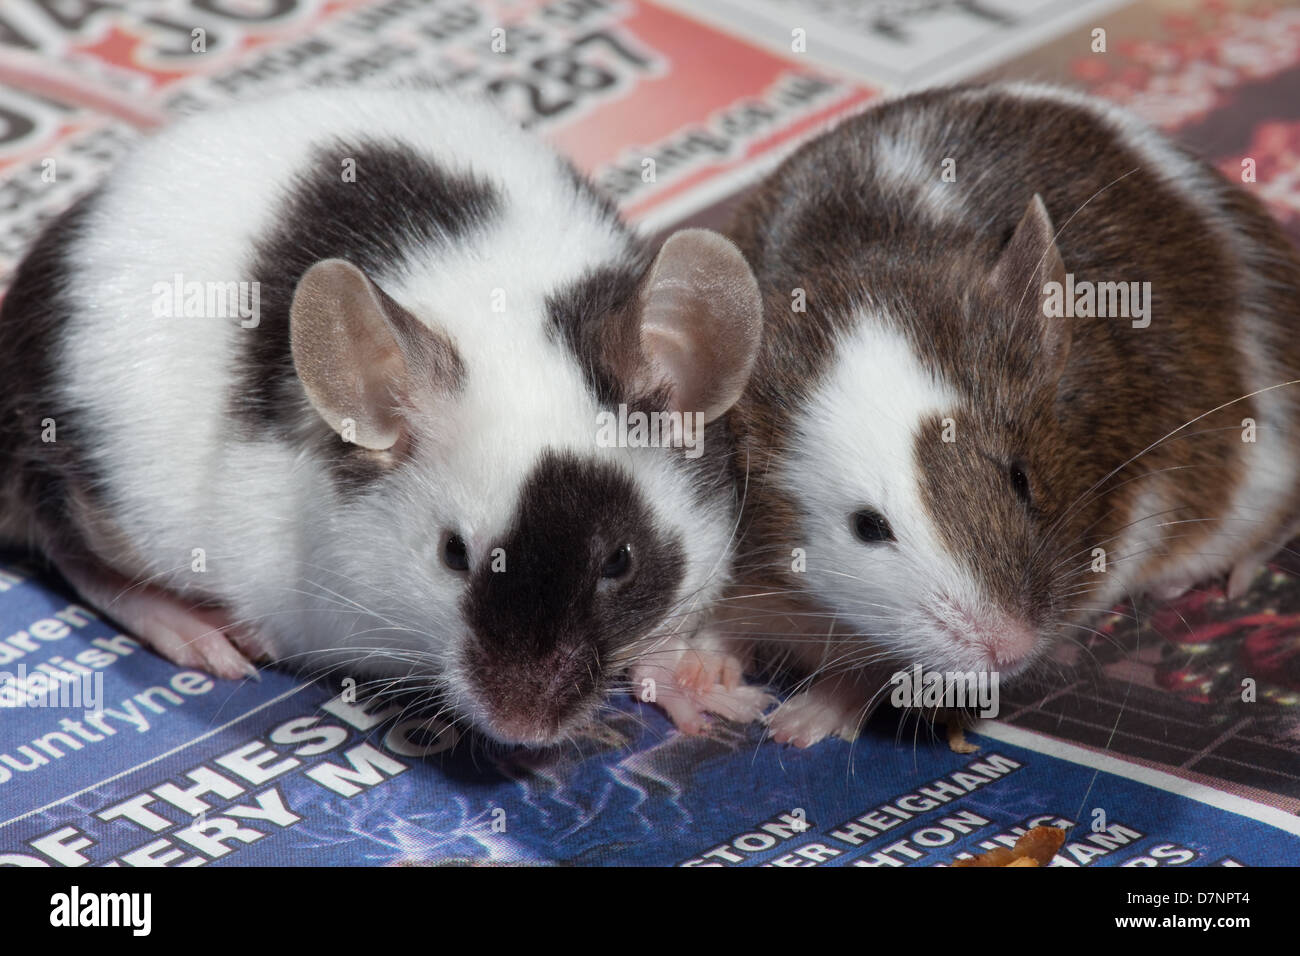 Domestic Pet Black and White or Pied Mice (Mus musculus). Stock Photo